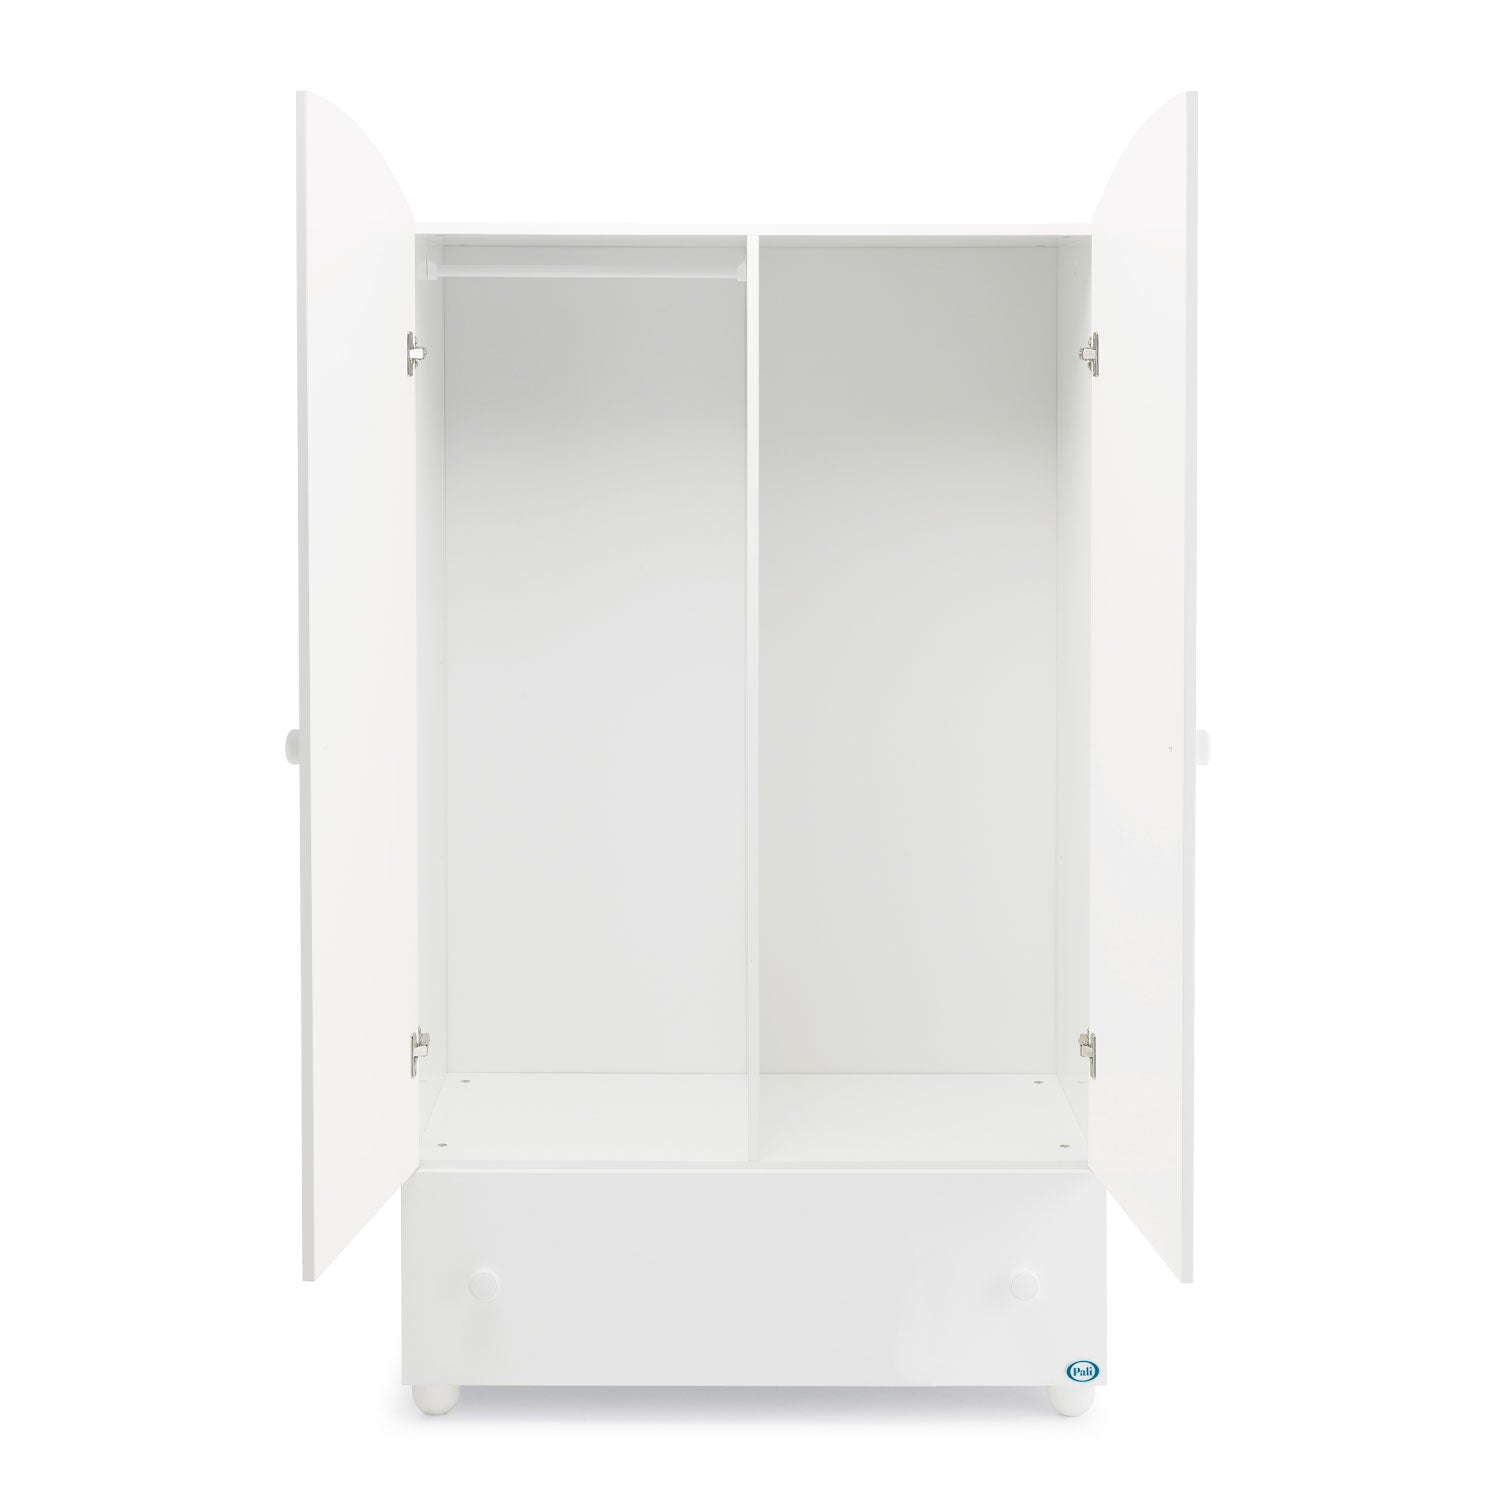 Eco Wardrobe with Deep Drawer by Pali